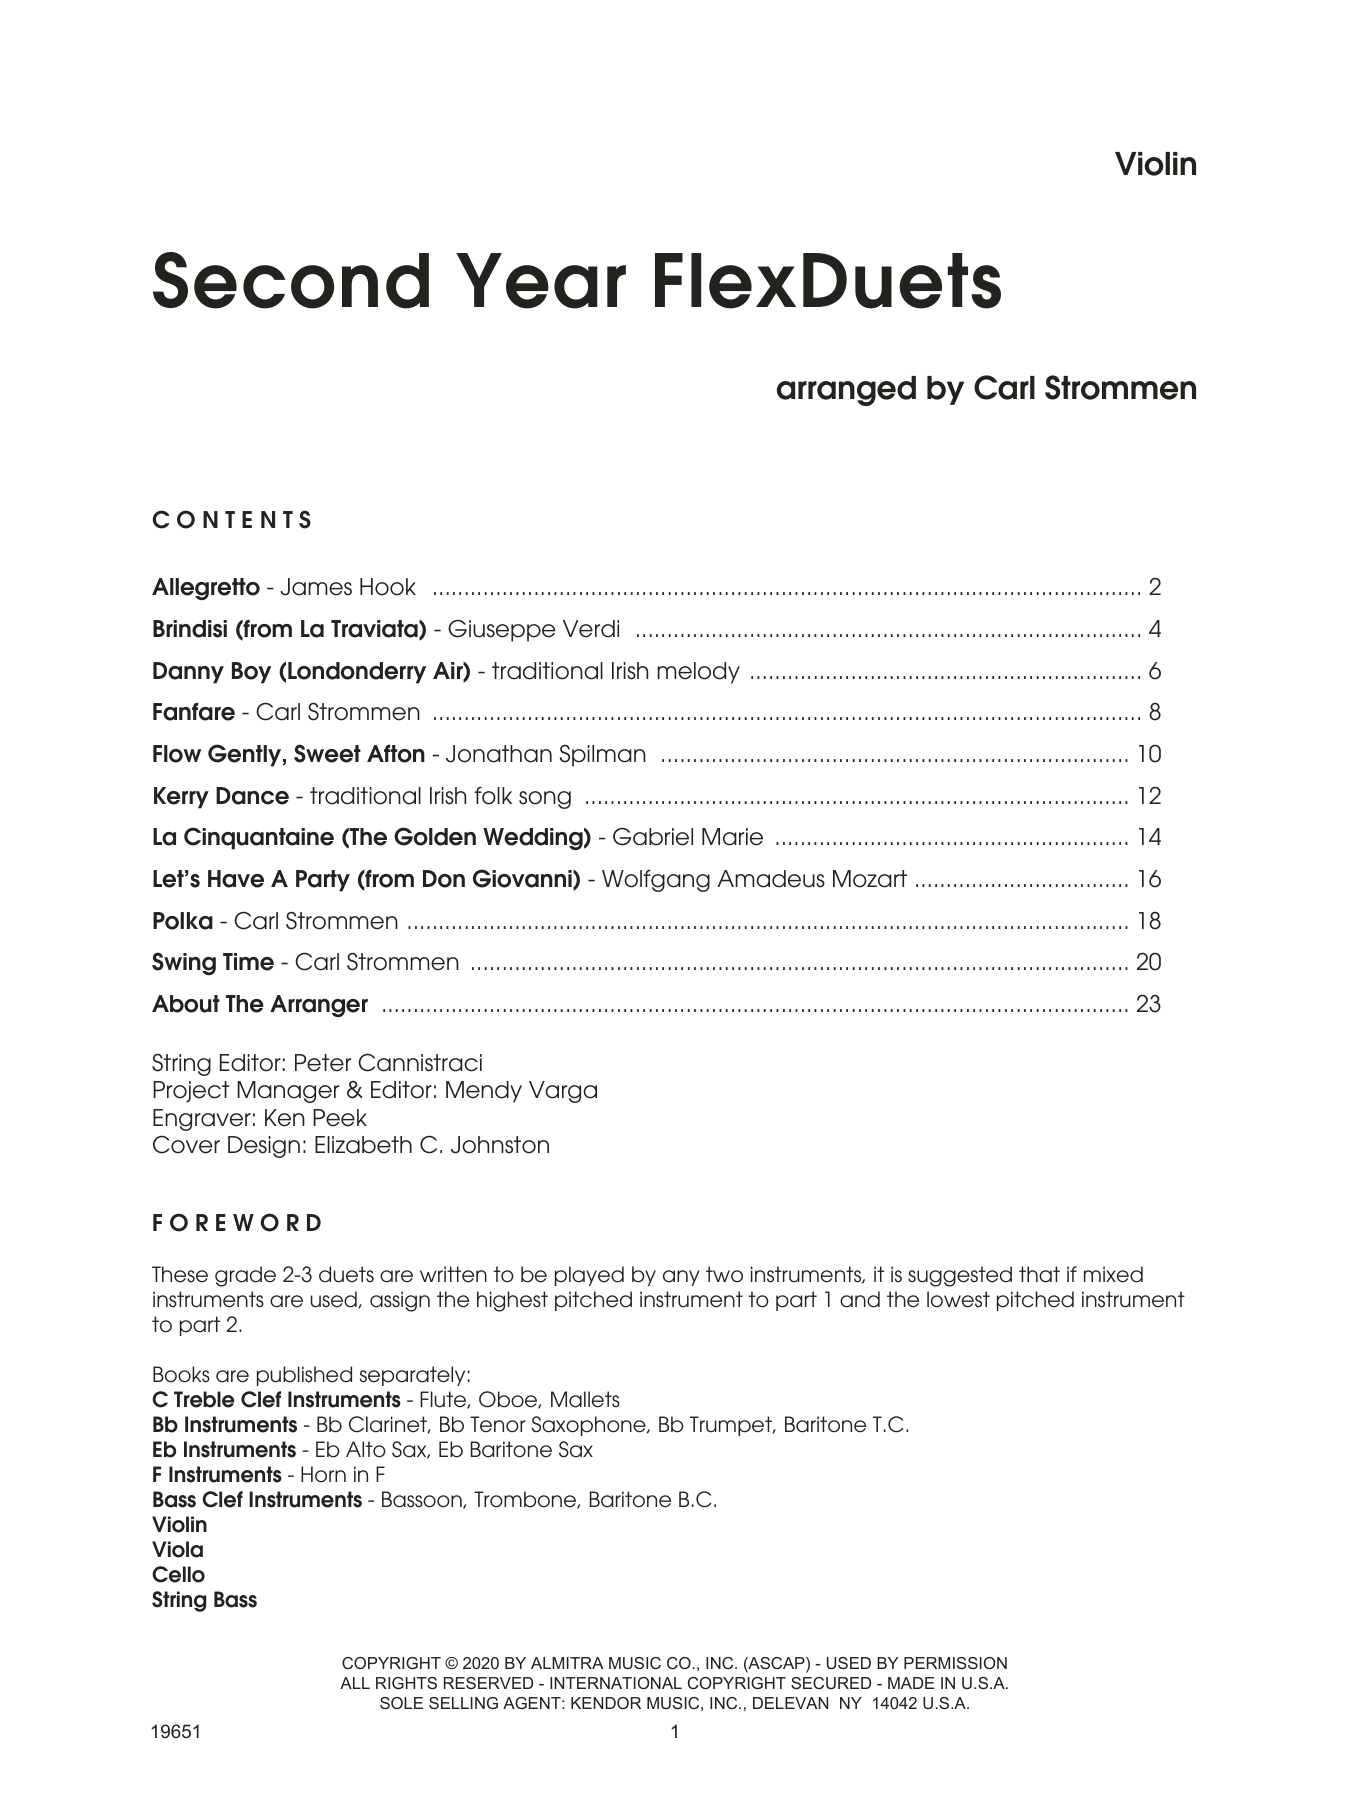 Download Carl Strommen Second Year FlexDuets - Violin sheet music and printable PDF score & Classical music notes